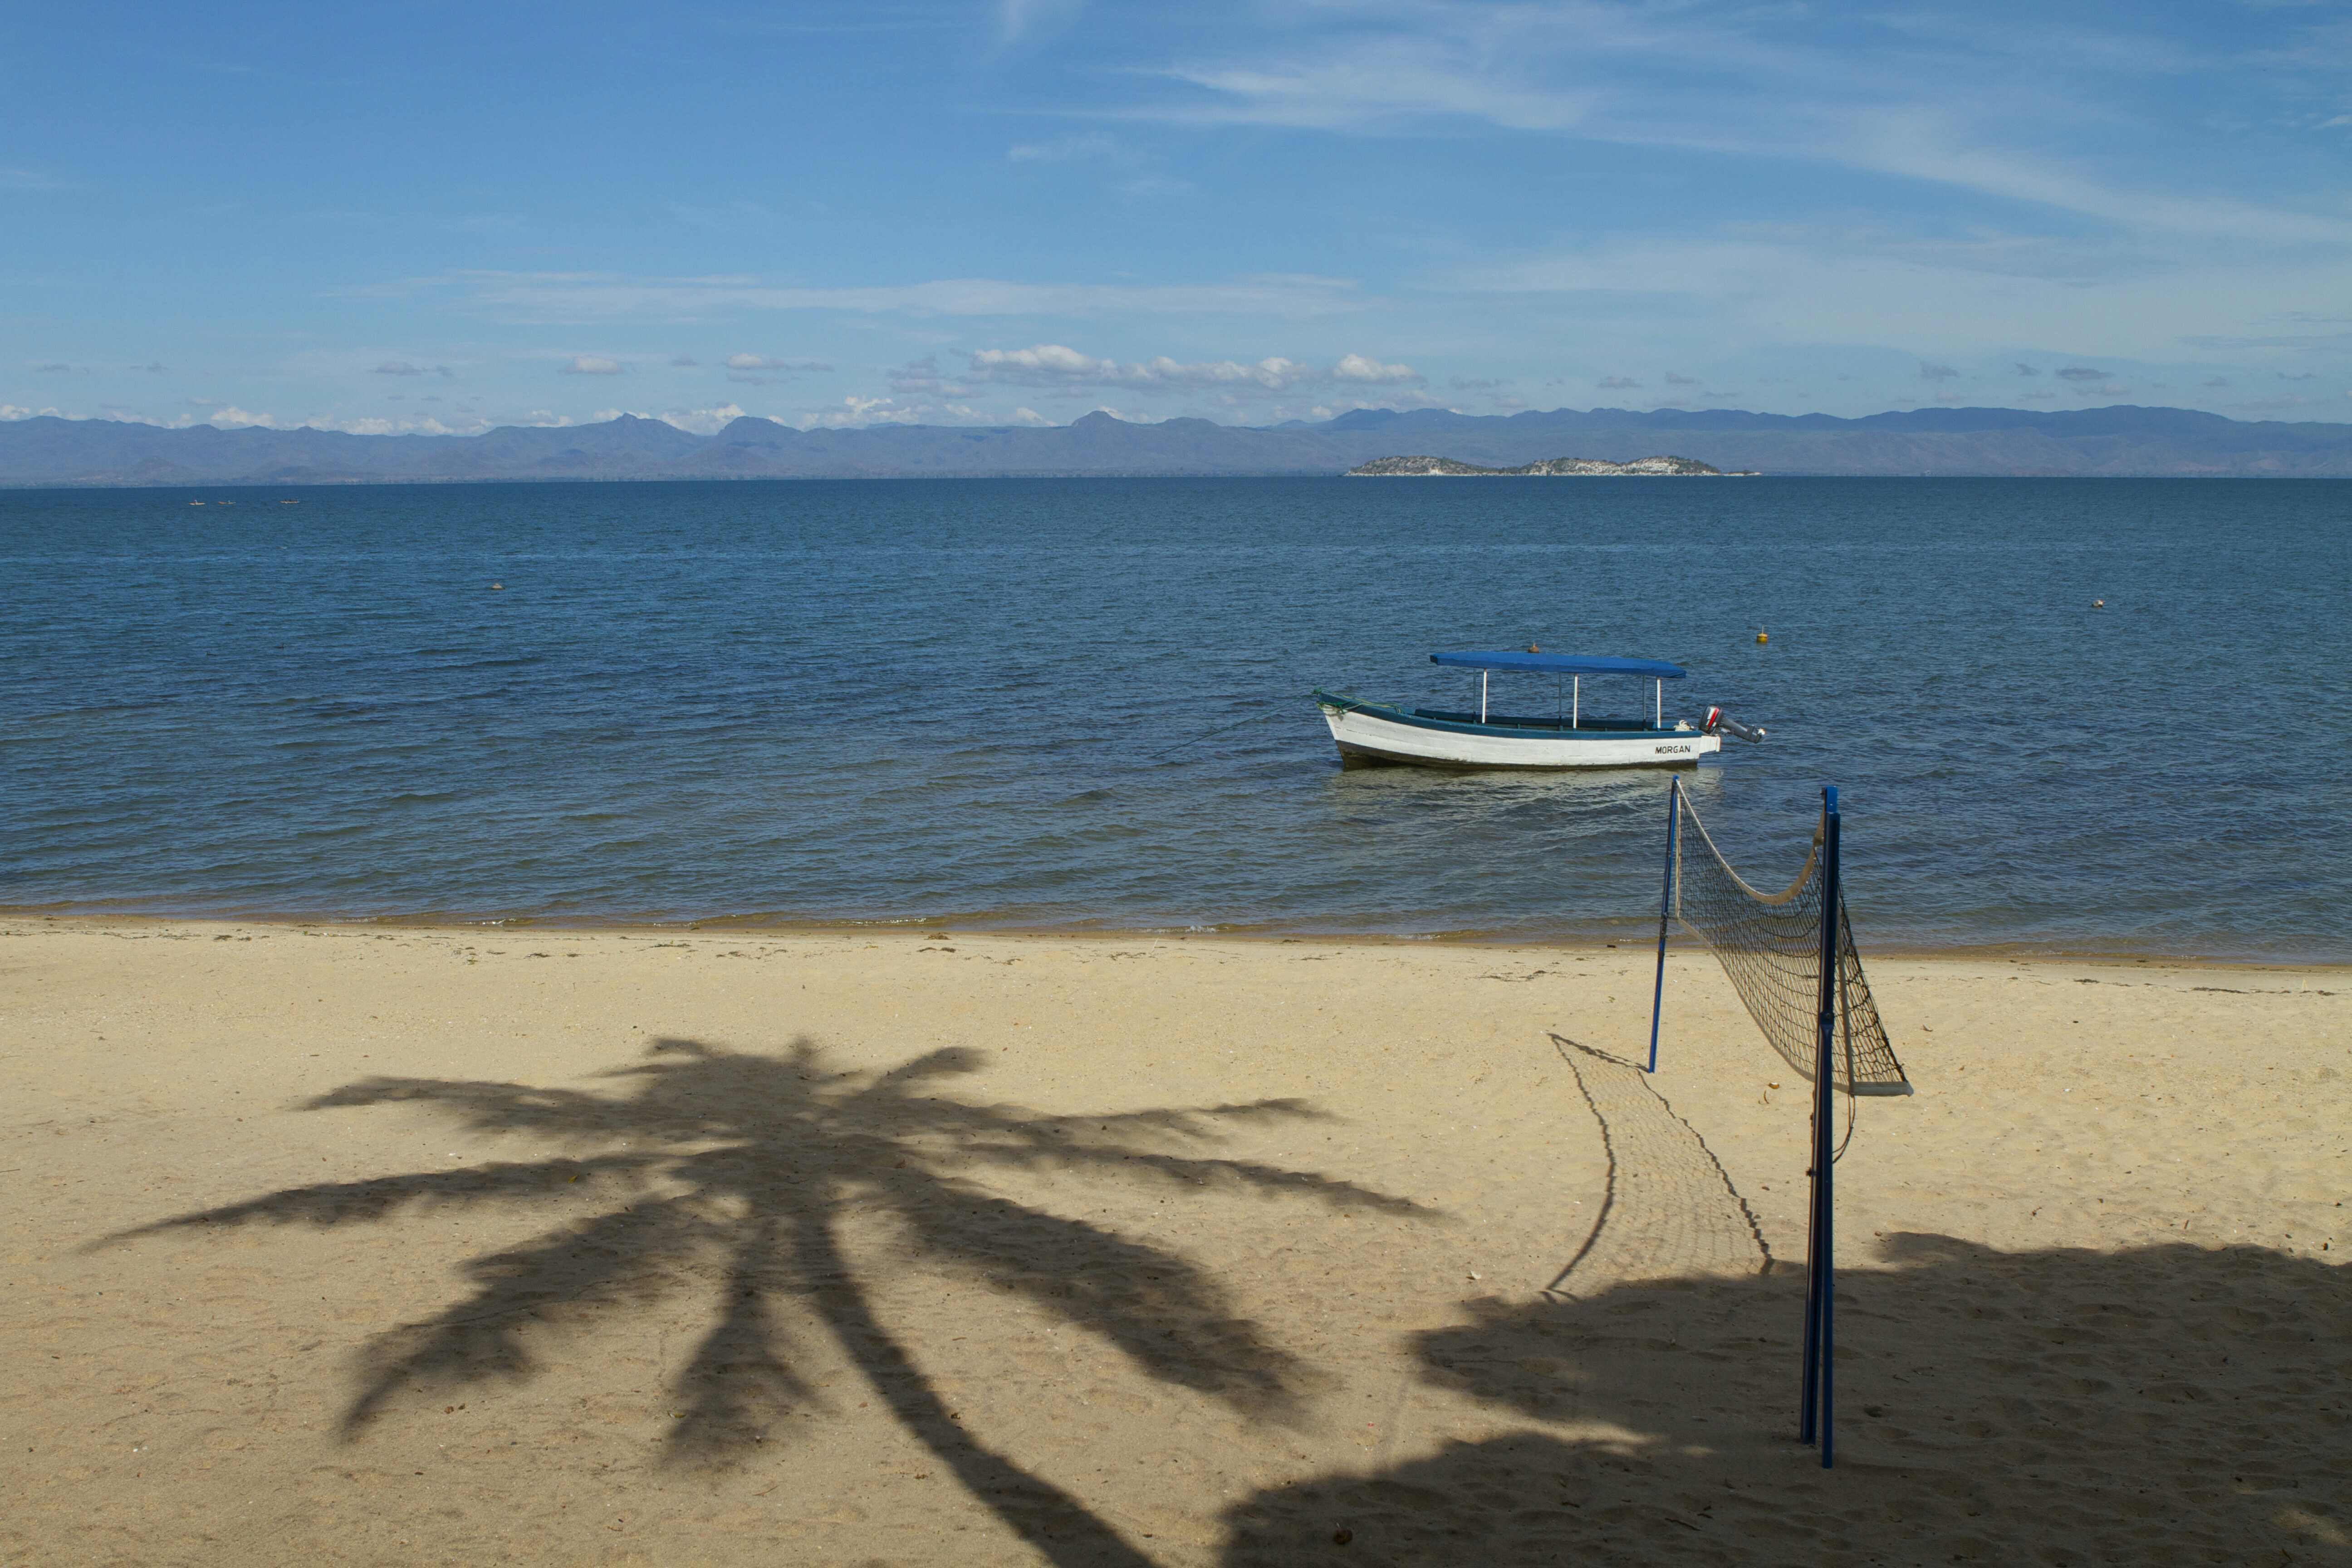 Where is the ideal location for enjoying the blue lake, the golden sands and the blue skies of Lake Malawi?